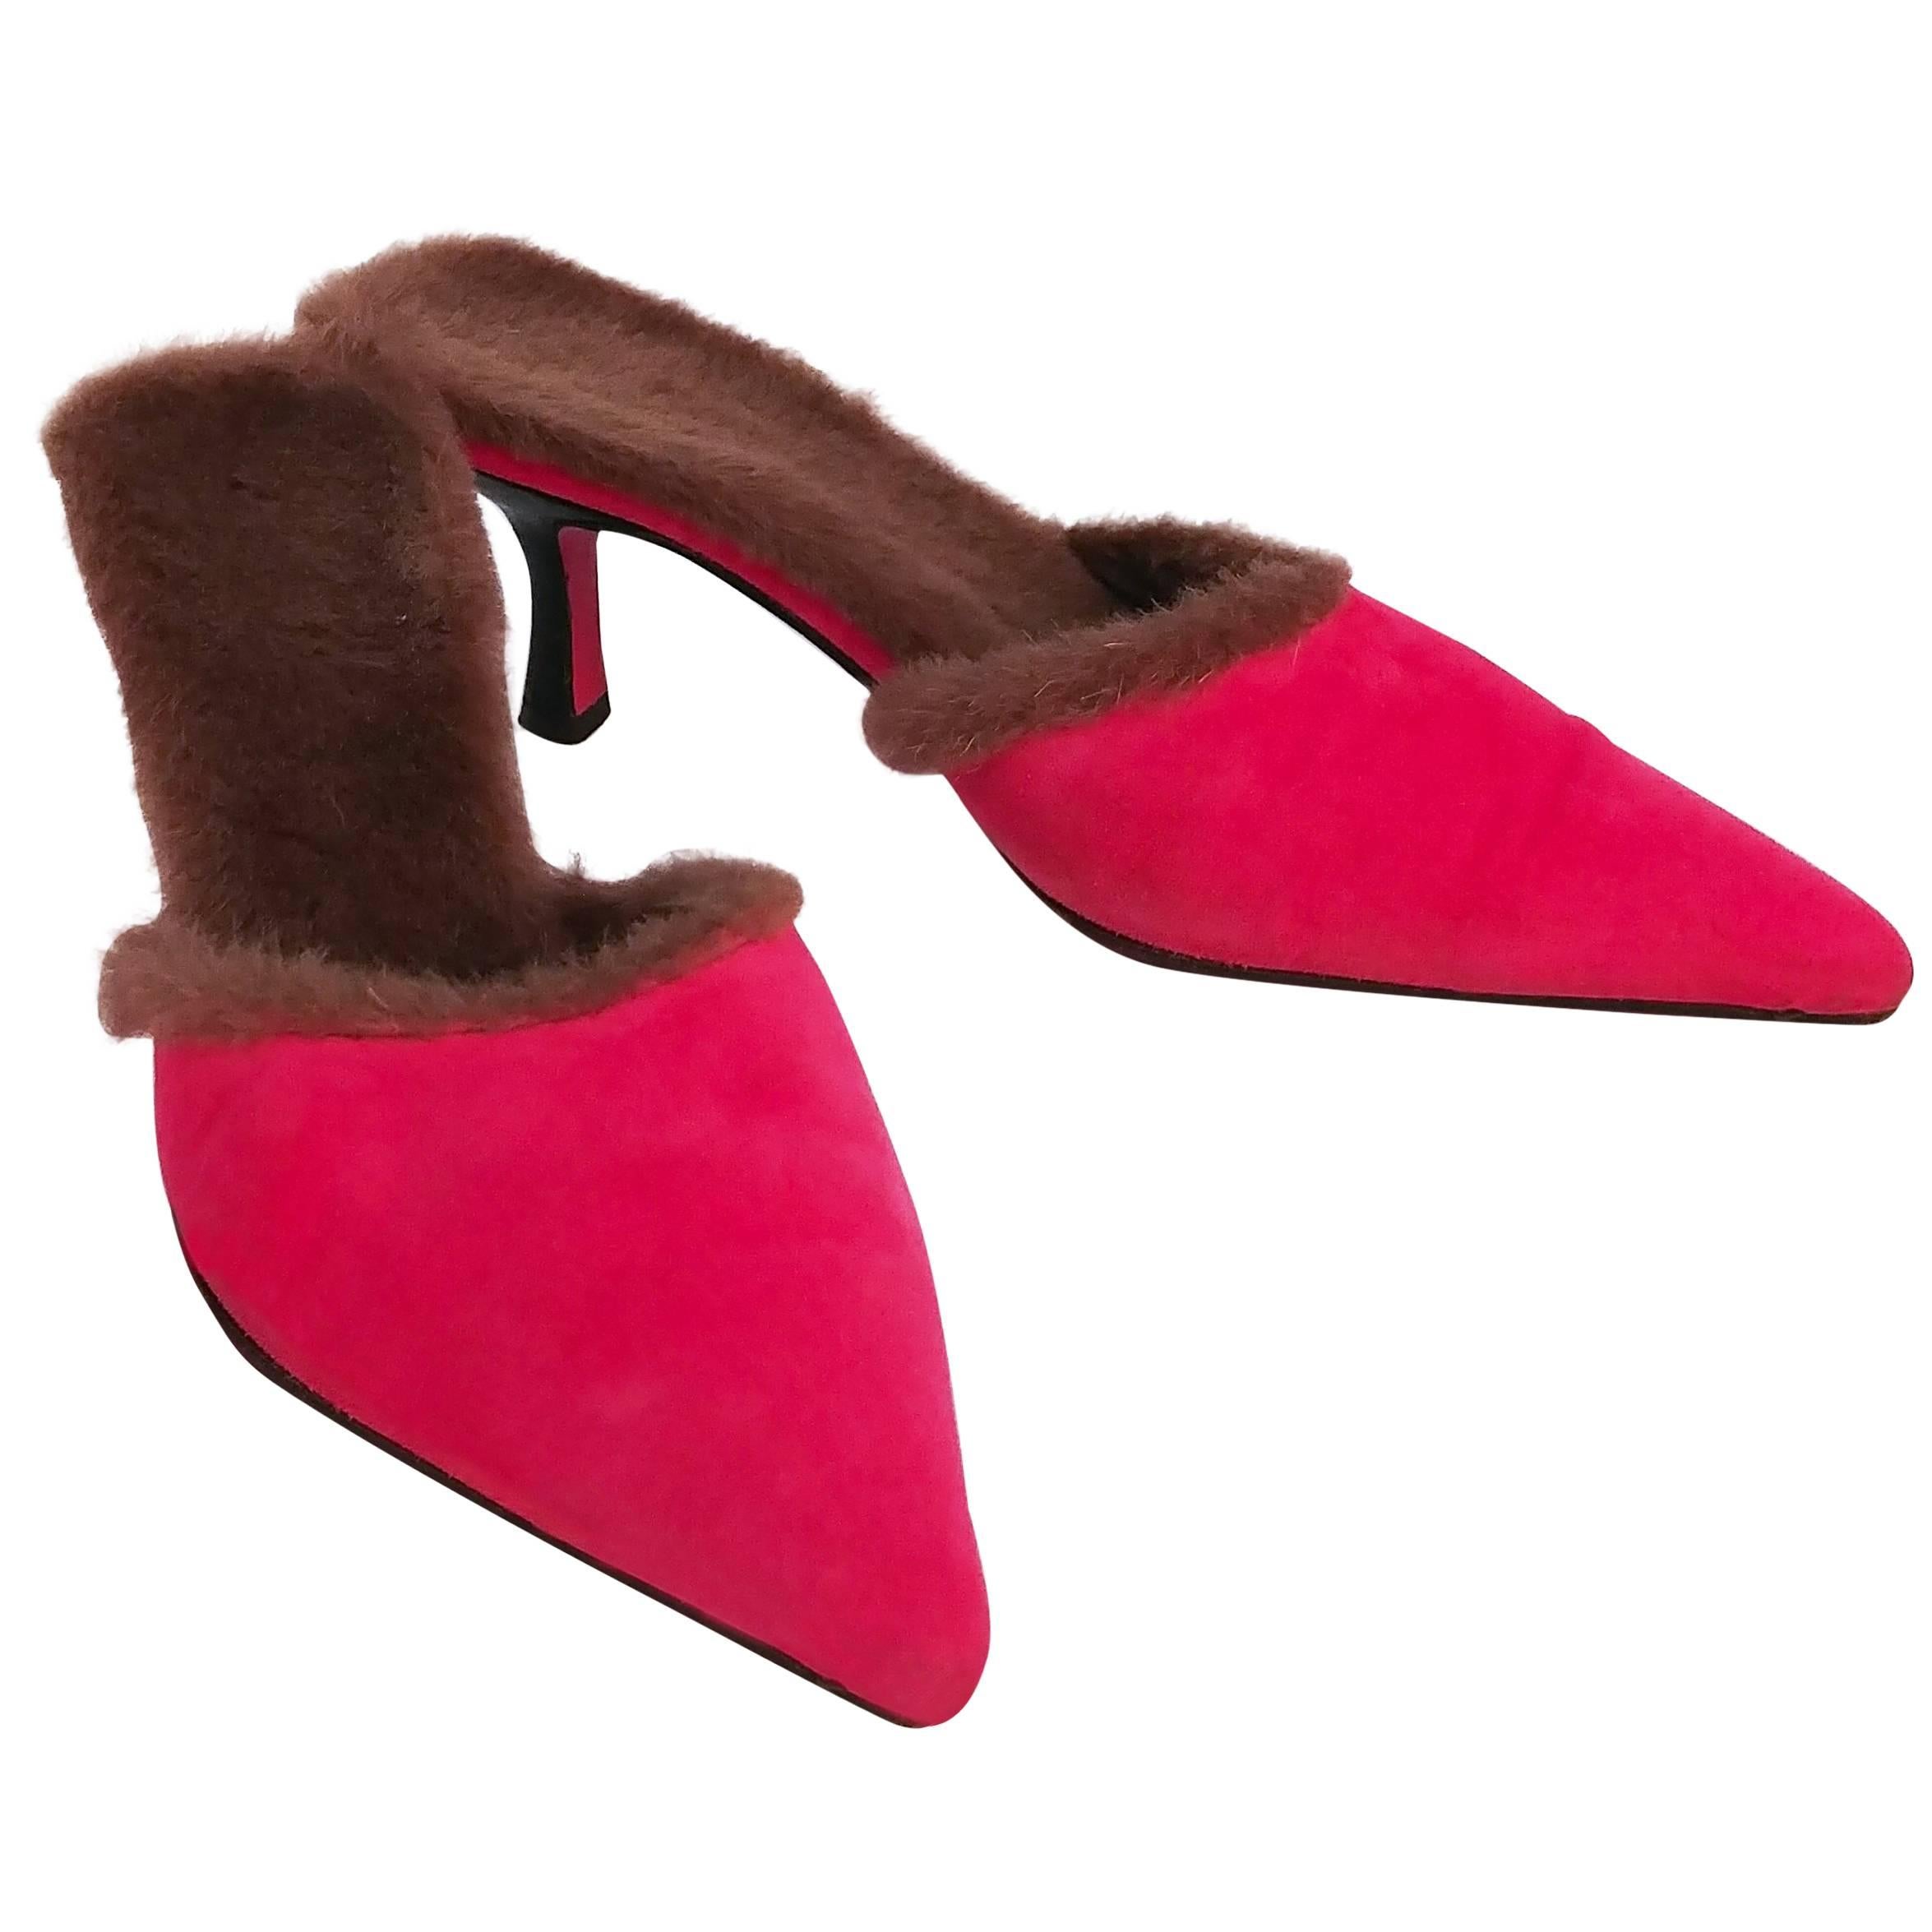 1980s Ungaro Hot Pink Suede Mules w/ Faux Fur Lining